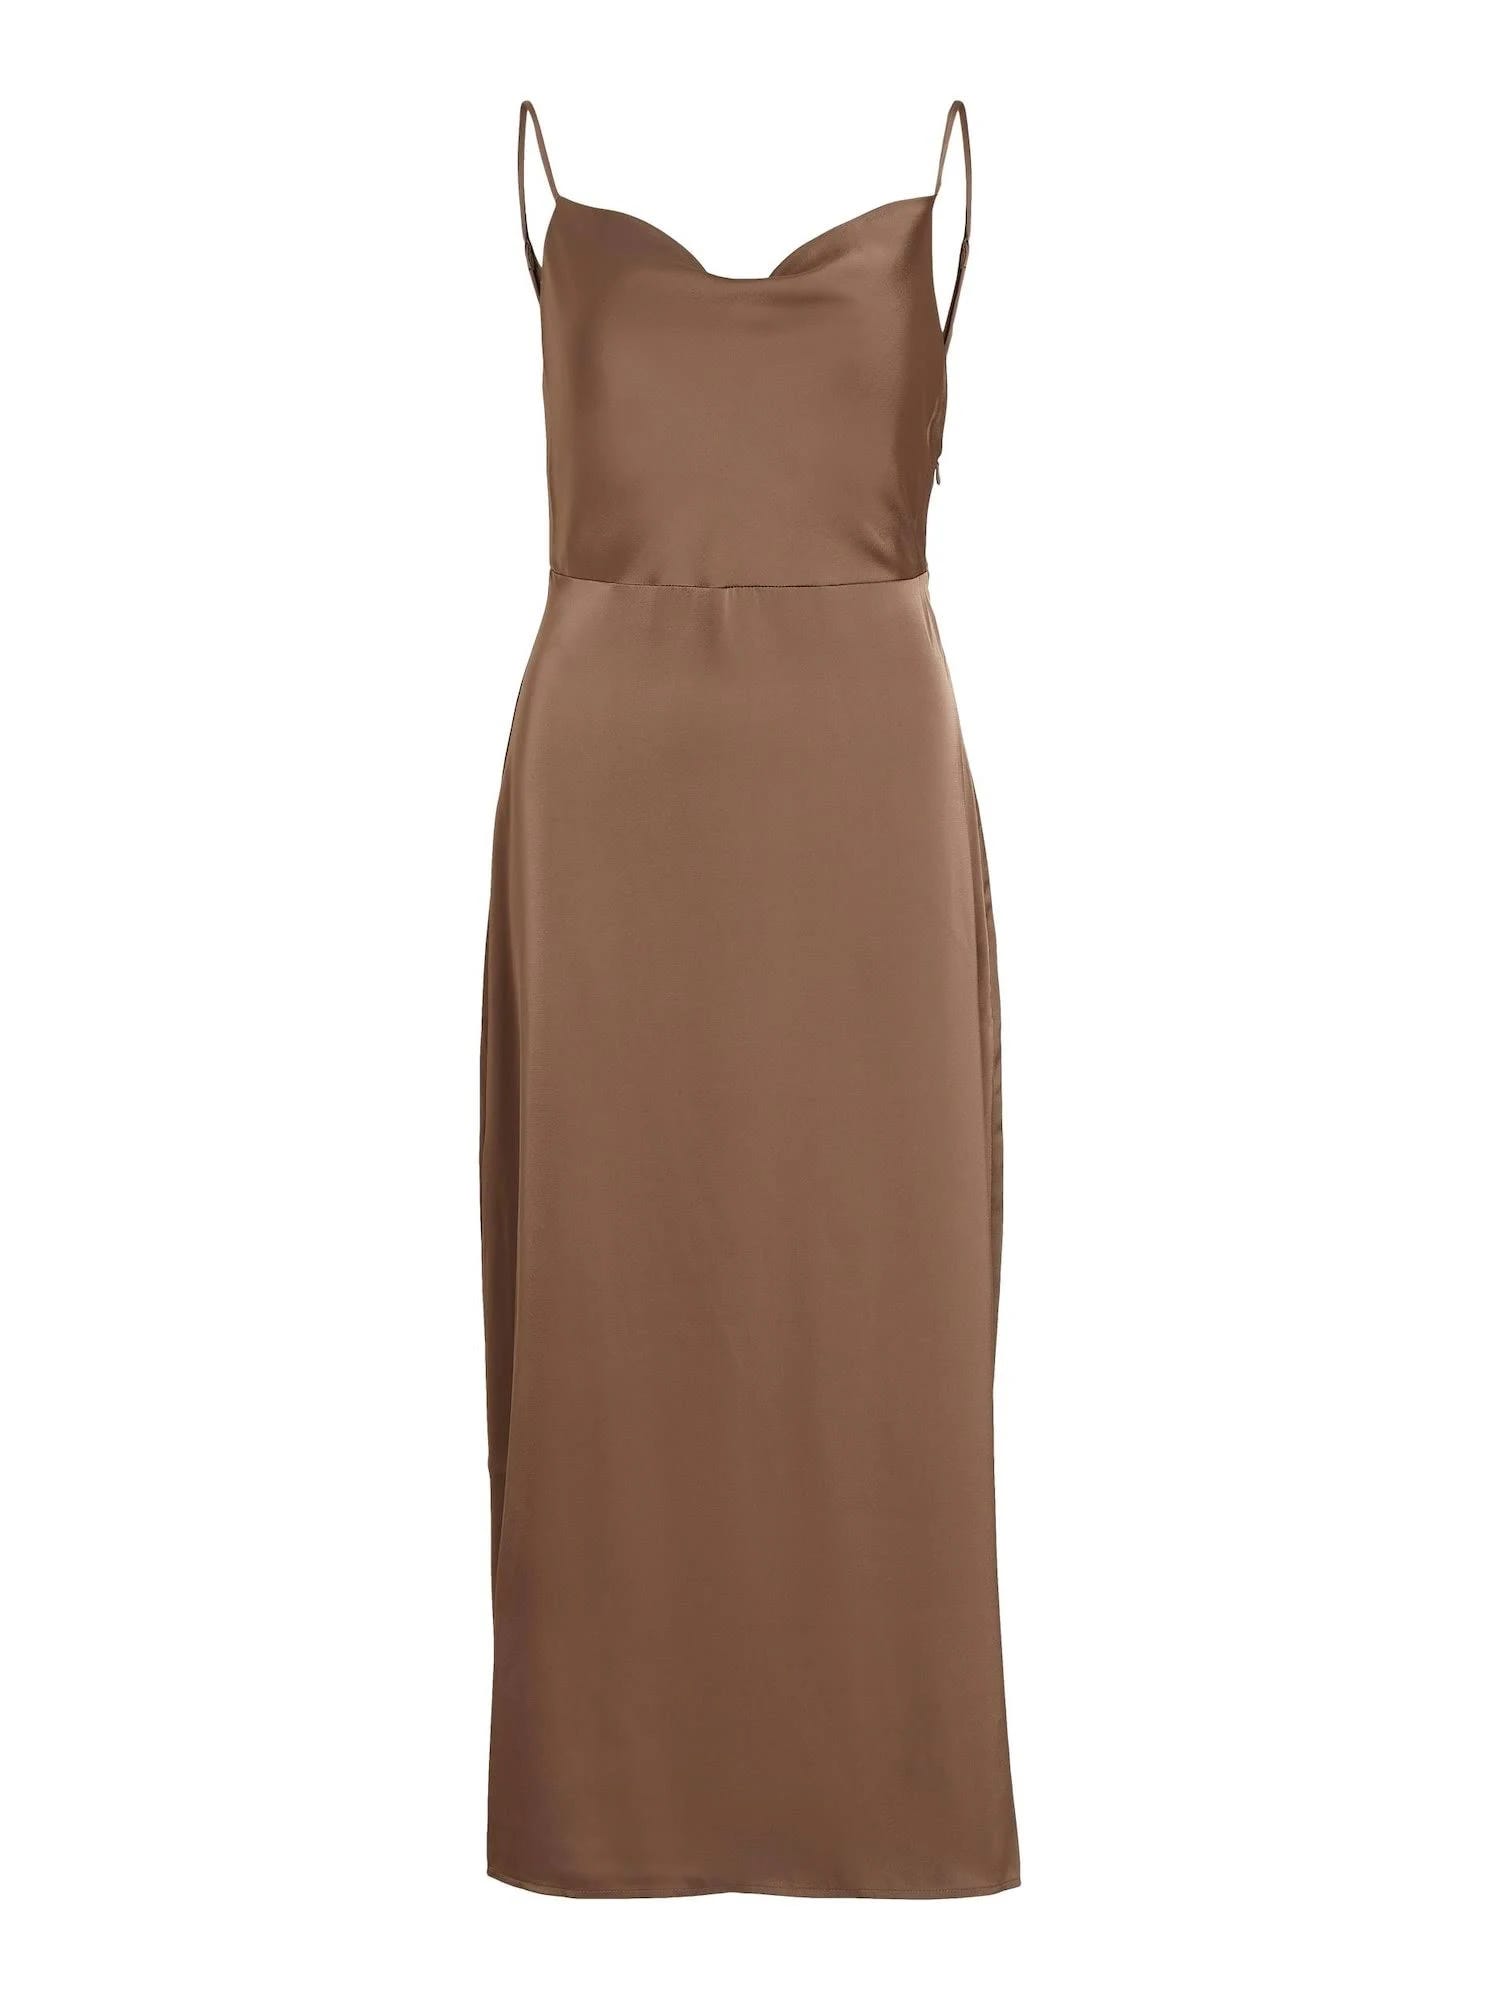 Stylish Brown Cowl Neck Maxi Dress for Special Occasions | Image